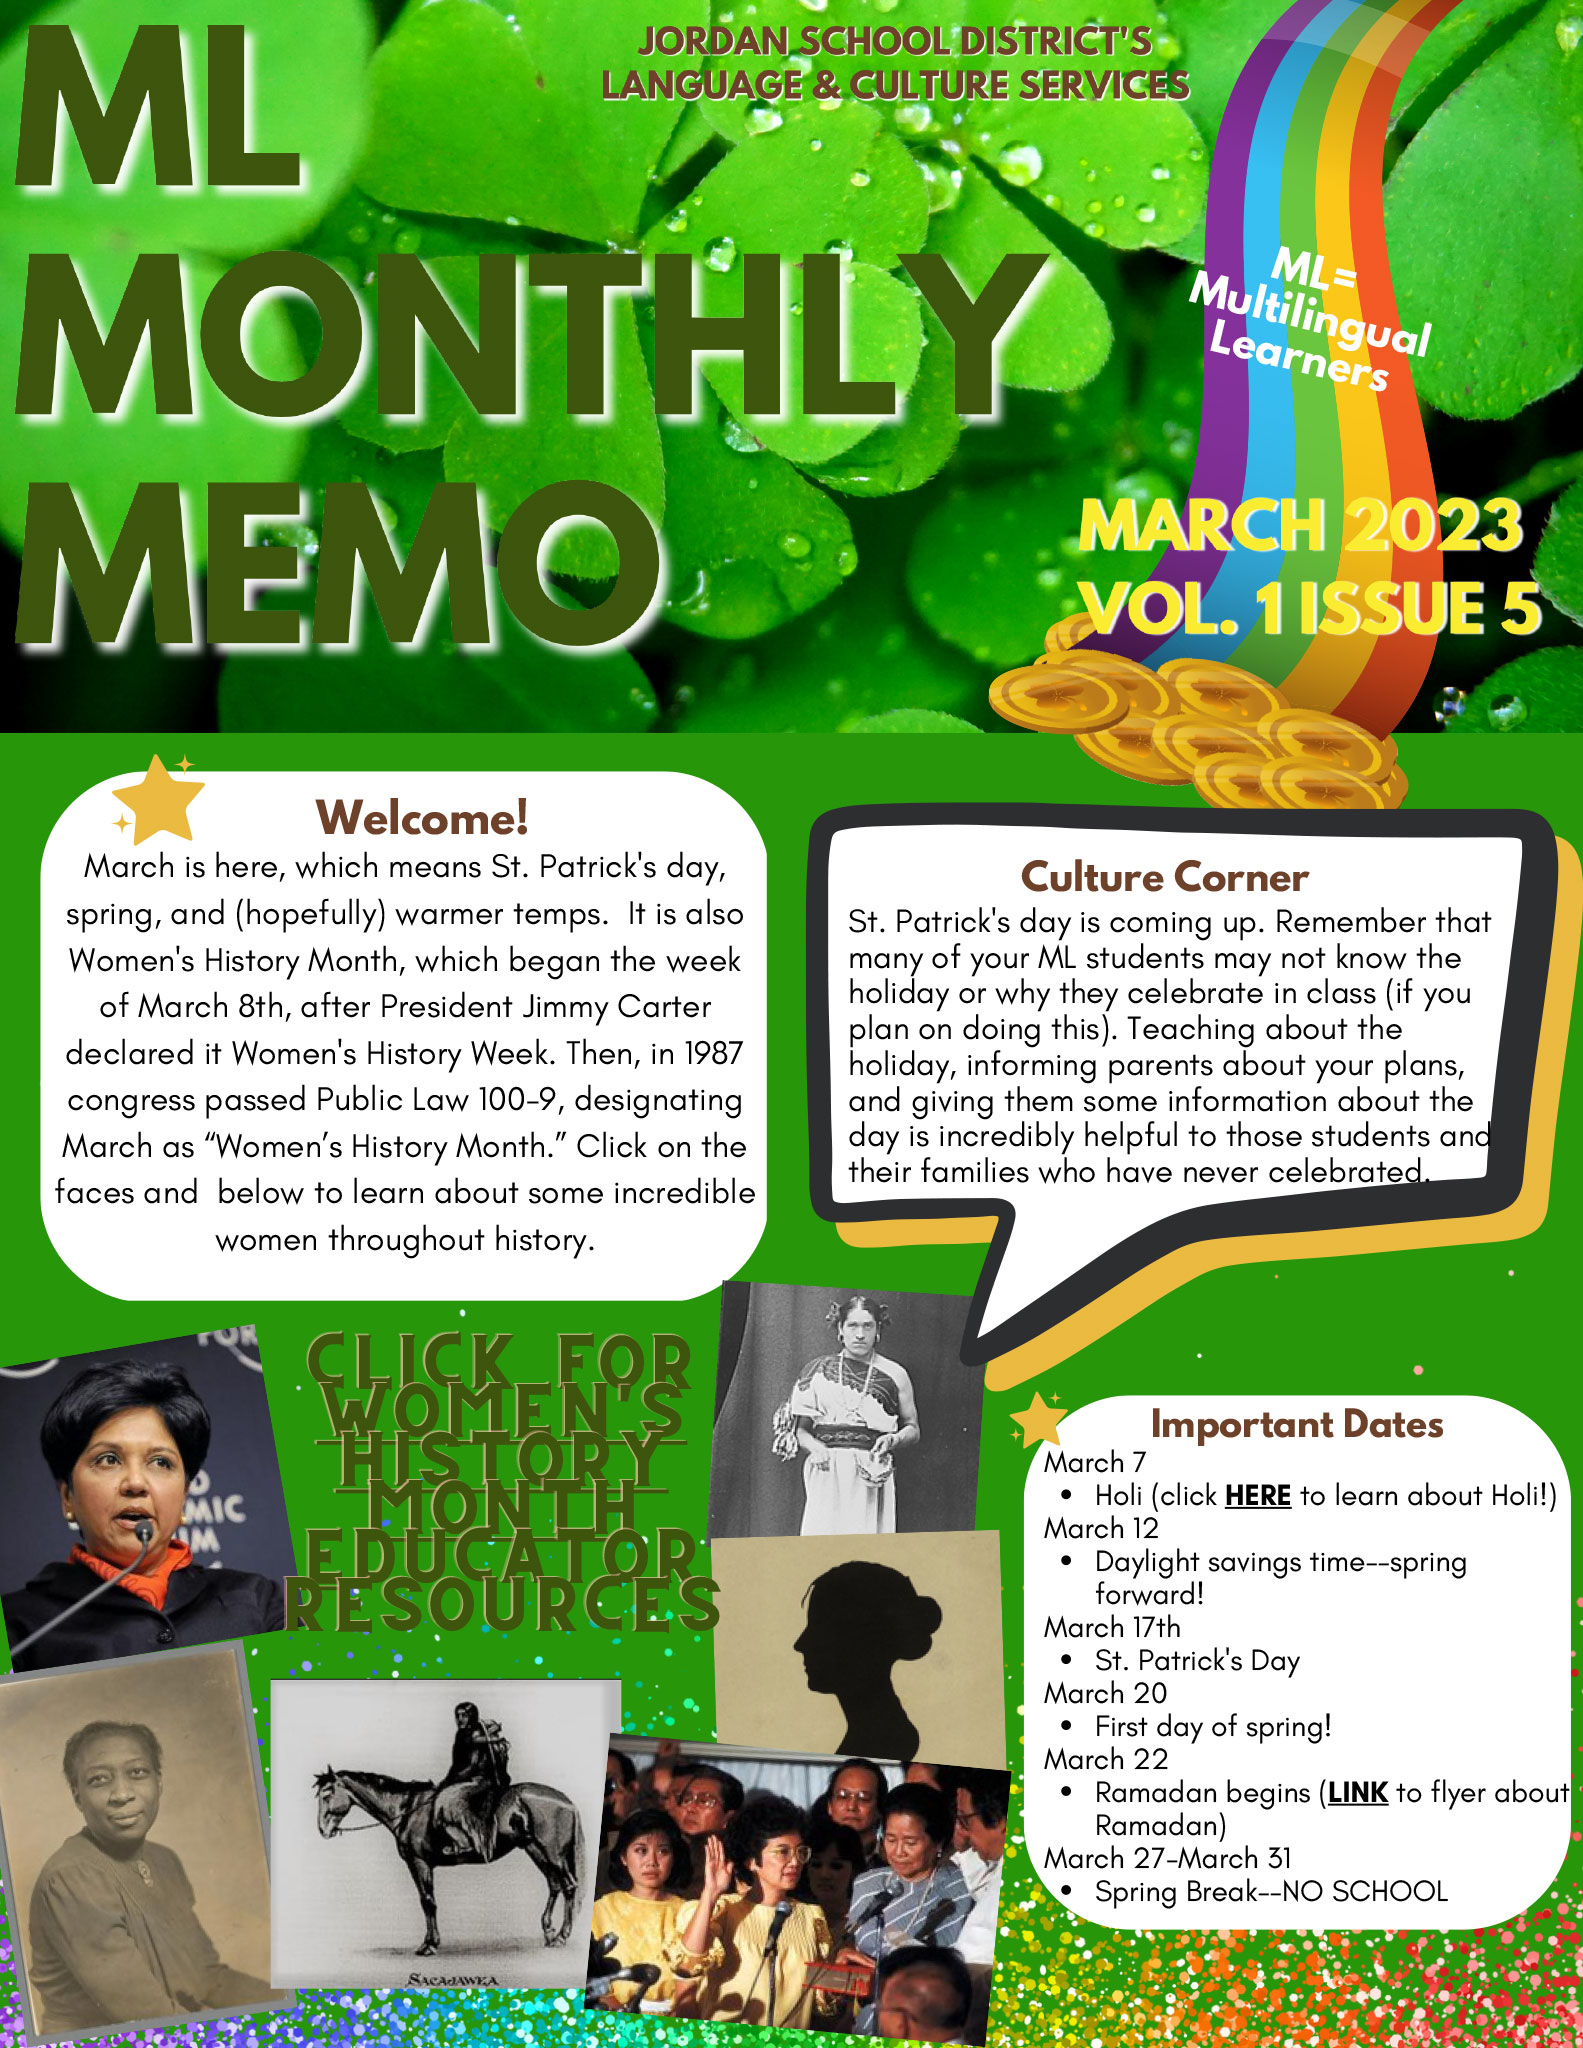 March 2023 Language & Culture Services Newsletter